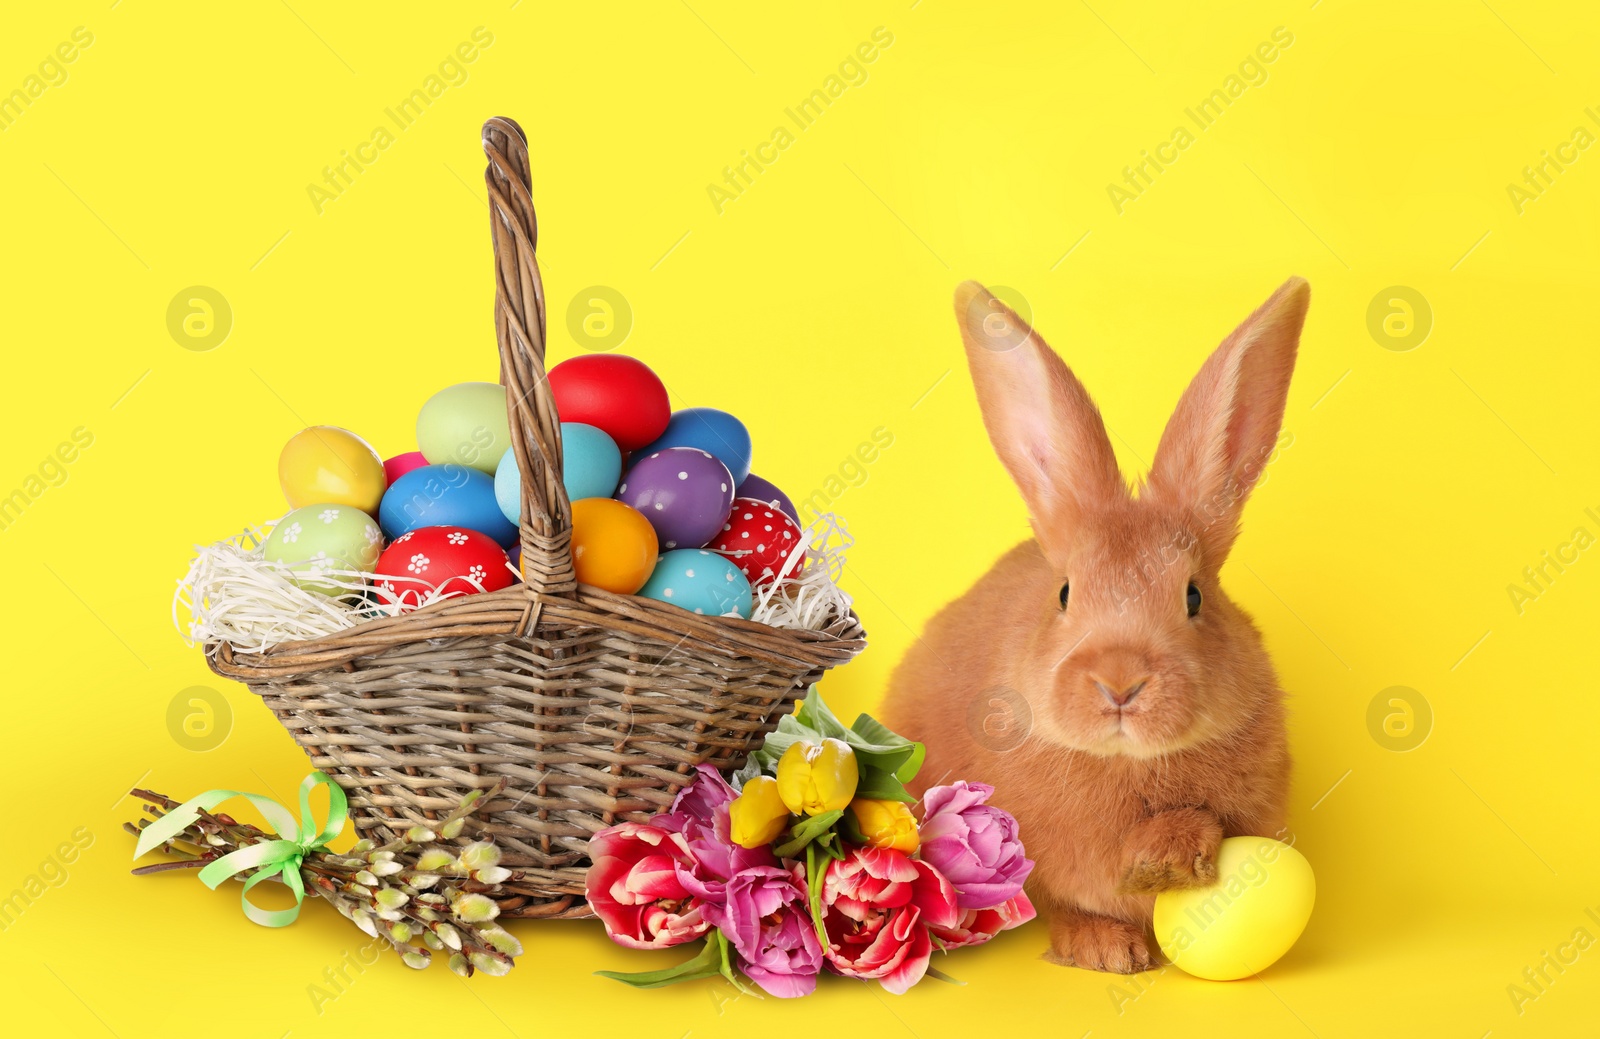 Image of Cute bunny and wicker basket with bright Easter eggs on yellow background